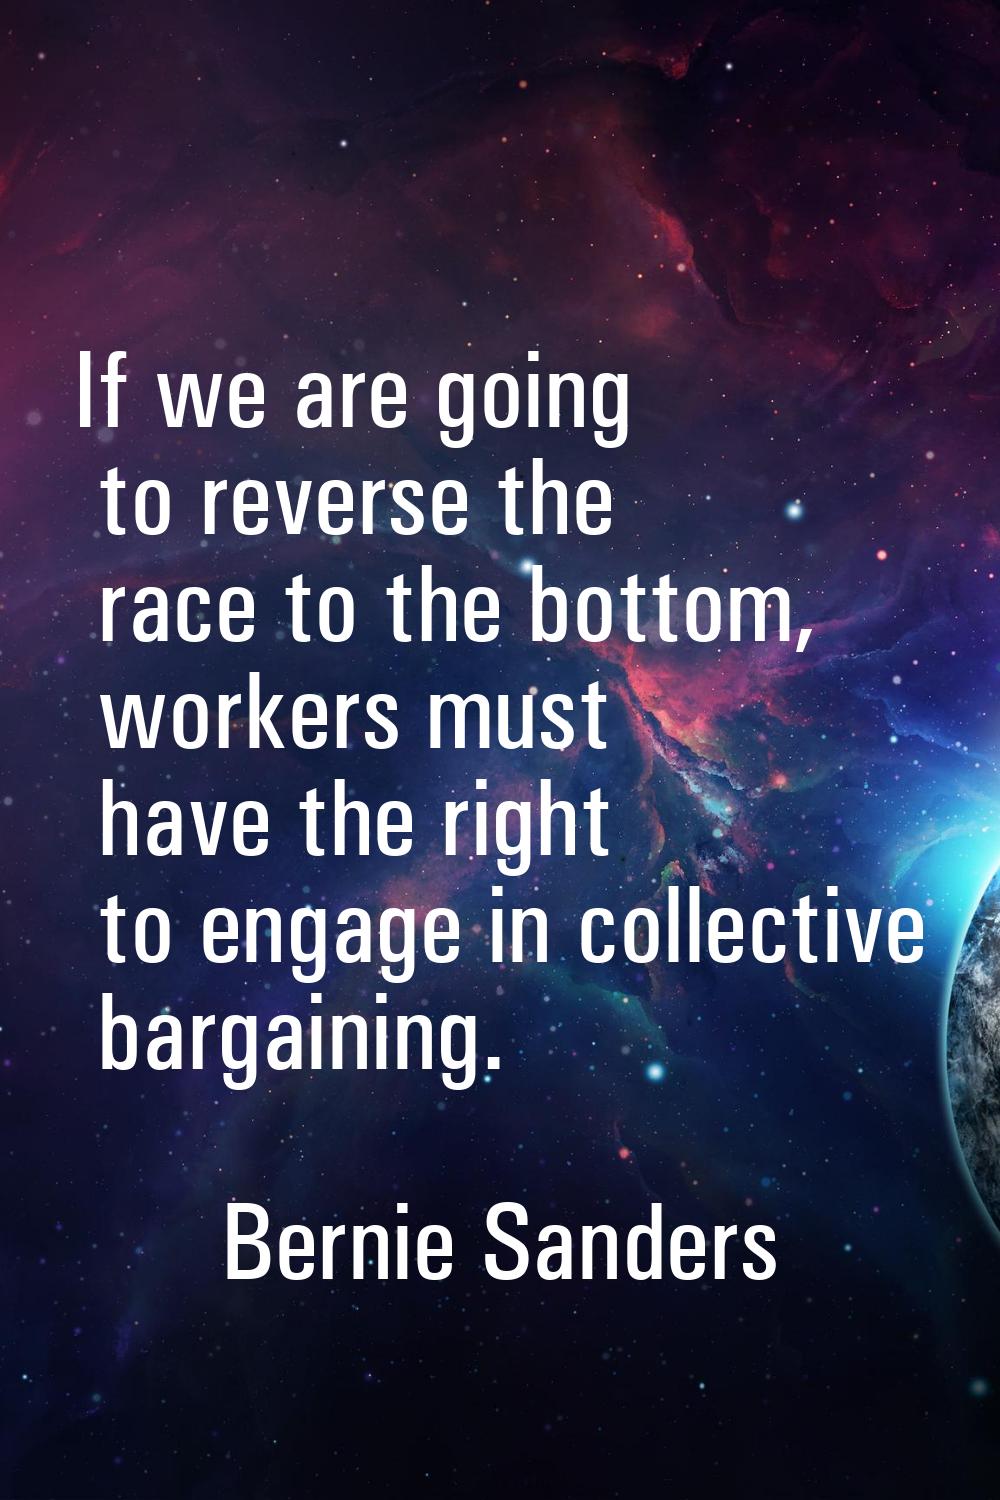 If we are going to reverse the race to the bottom, workers must have the right to engage in collect